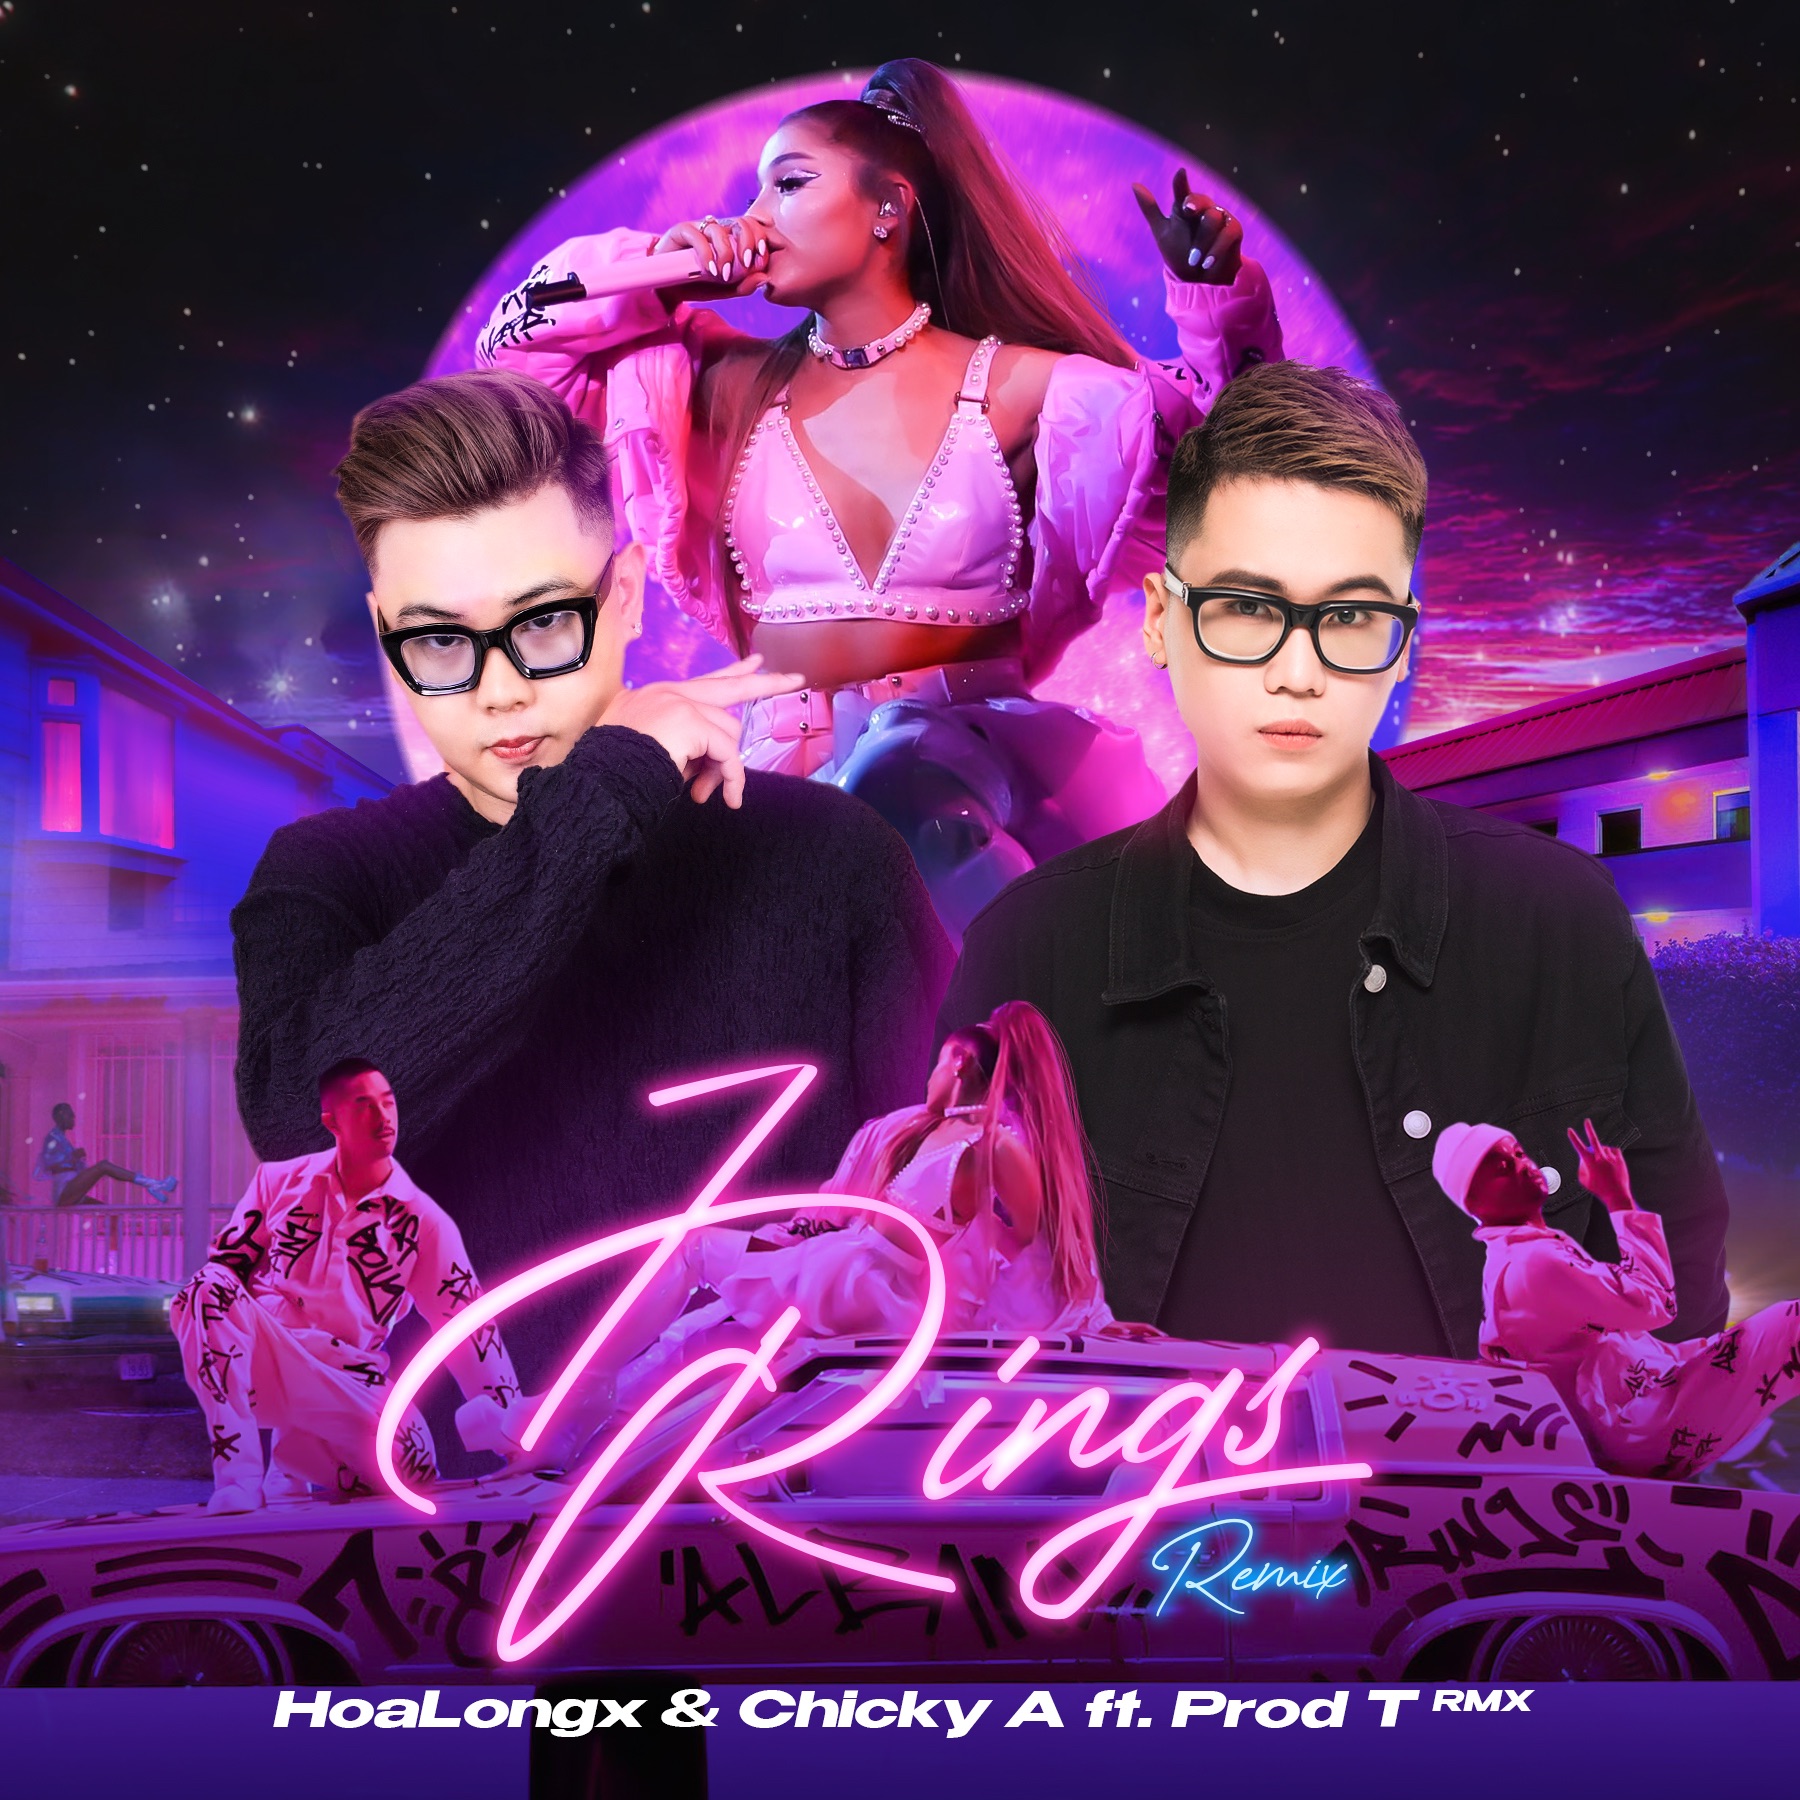 I-download 7 RINGS - HOALONGX & CHICKY A ft PROD T REMIX